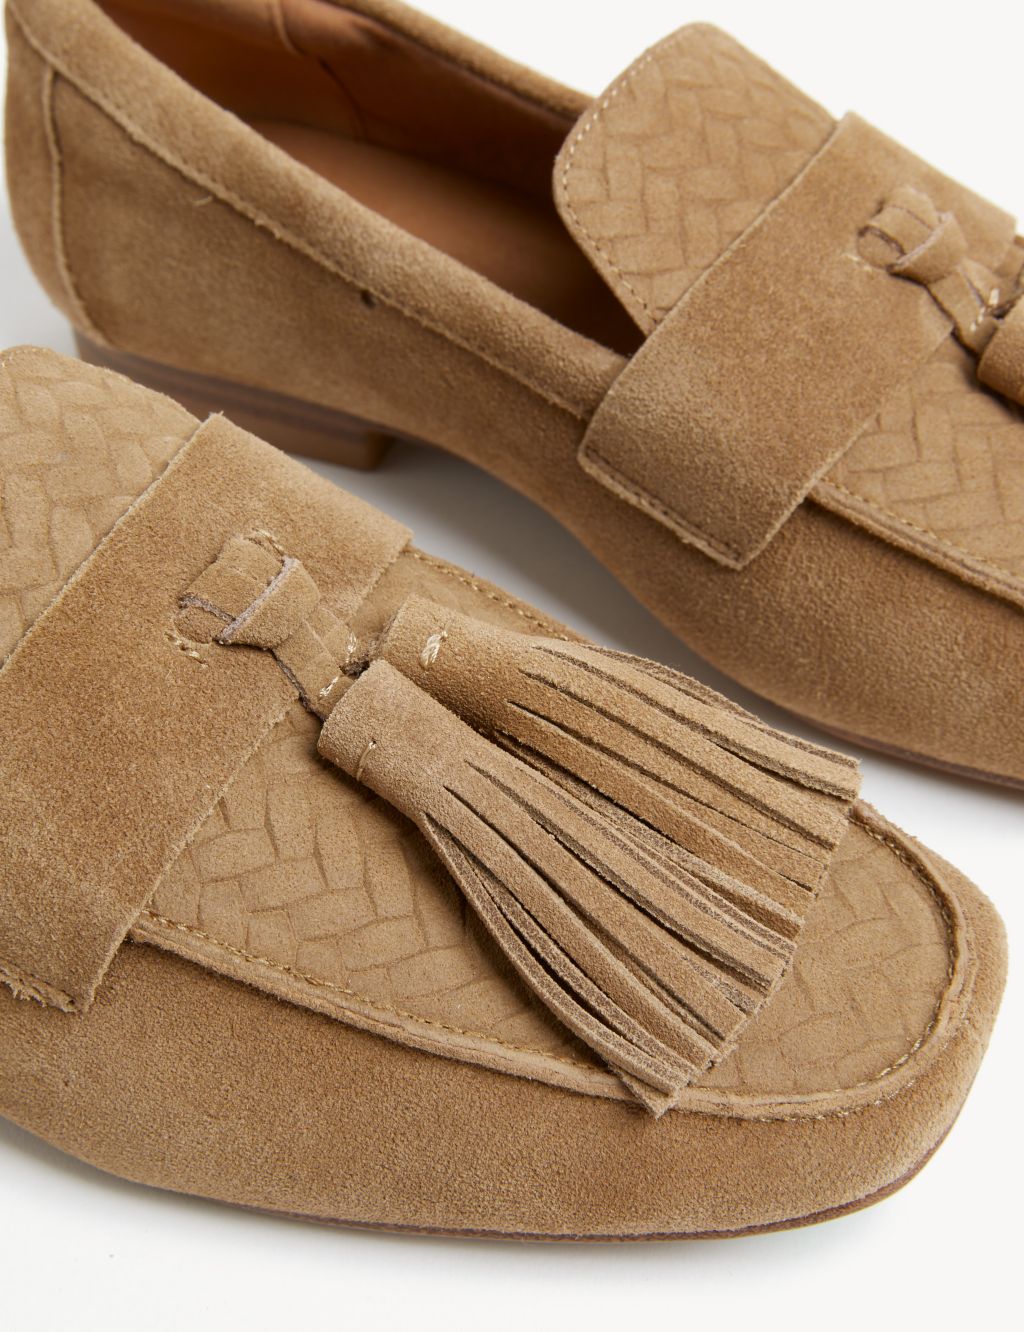 Suede Tassel Flat Loafers image 3